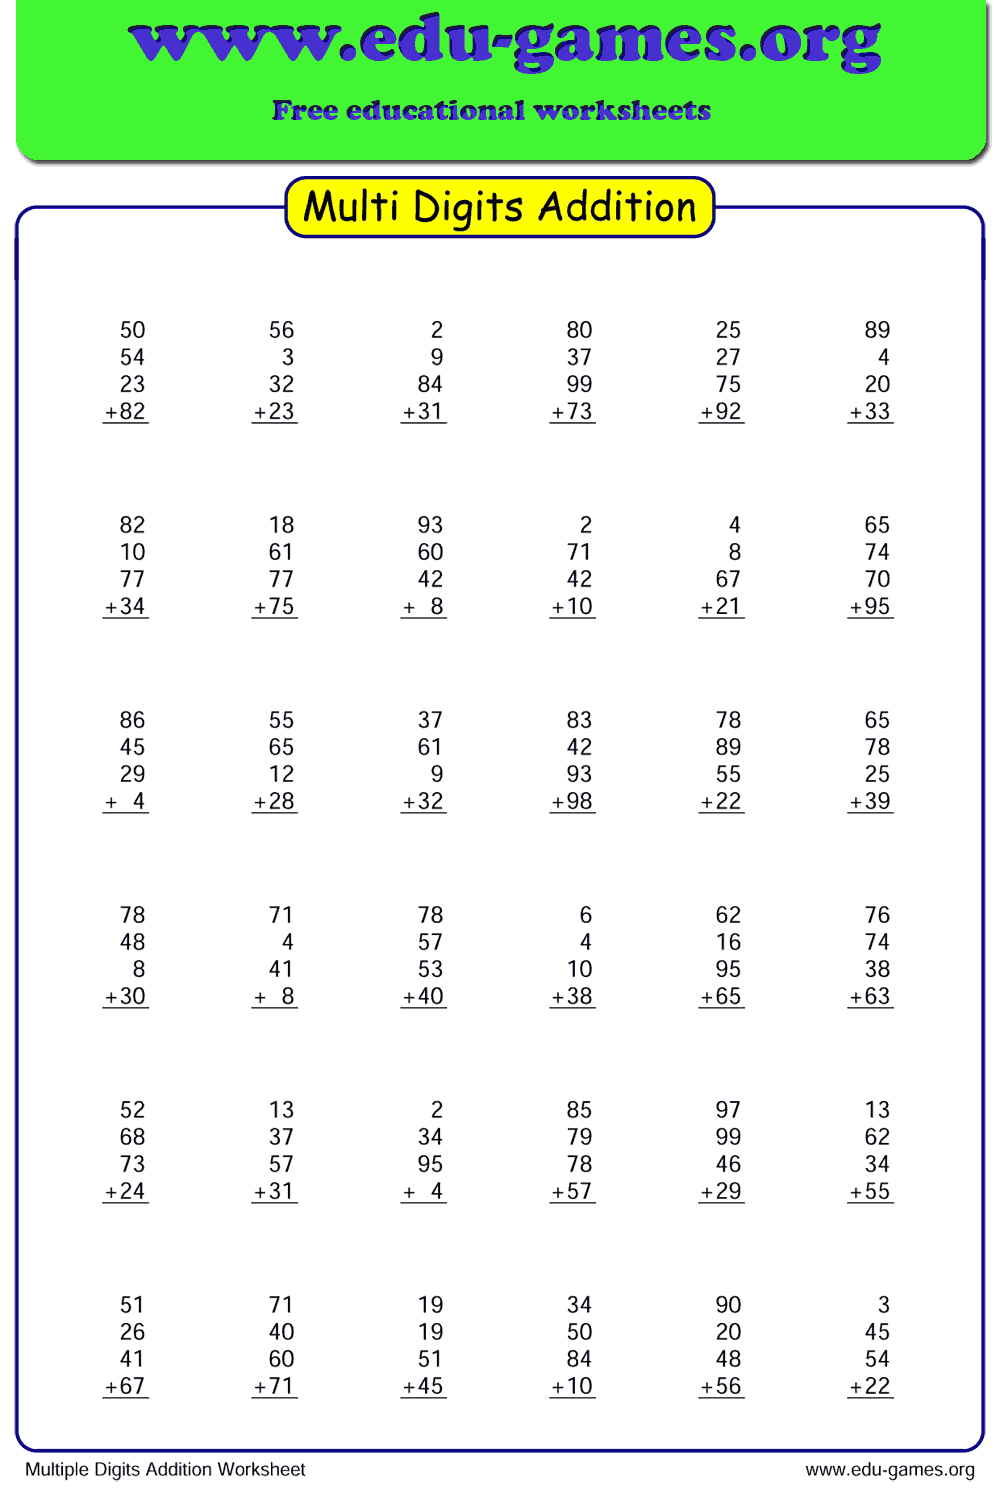 Multi Digits Addition Worksheet Generator | The Site for ...